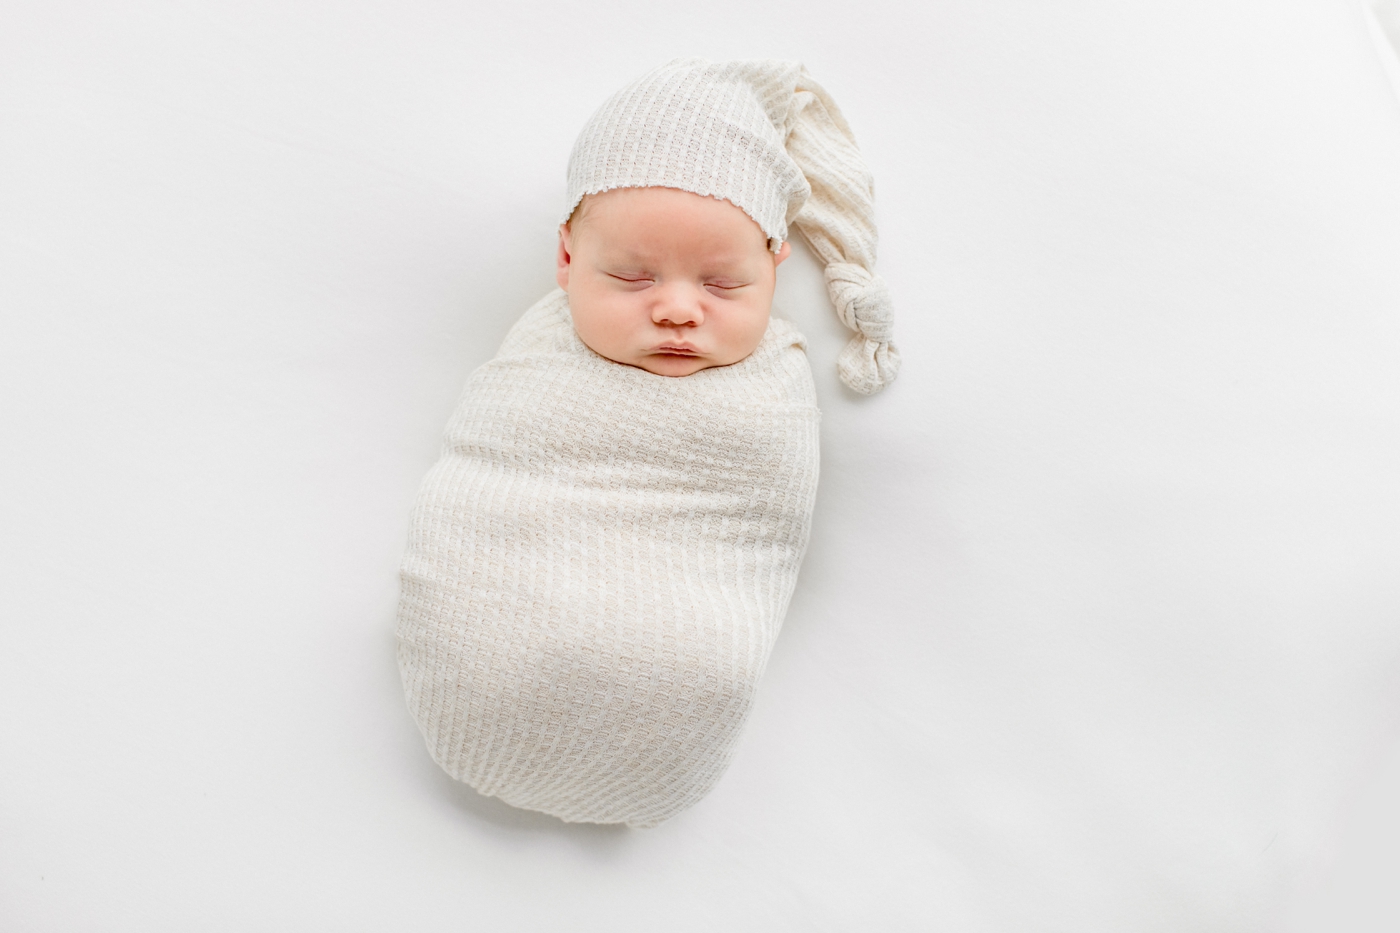 Baby boy sleeping with knit swaddle and hat. Photo by Austin Newborn Photographer, Sana Ahmed Photography.